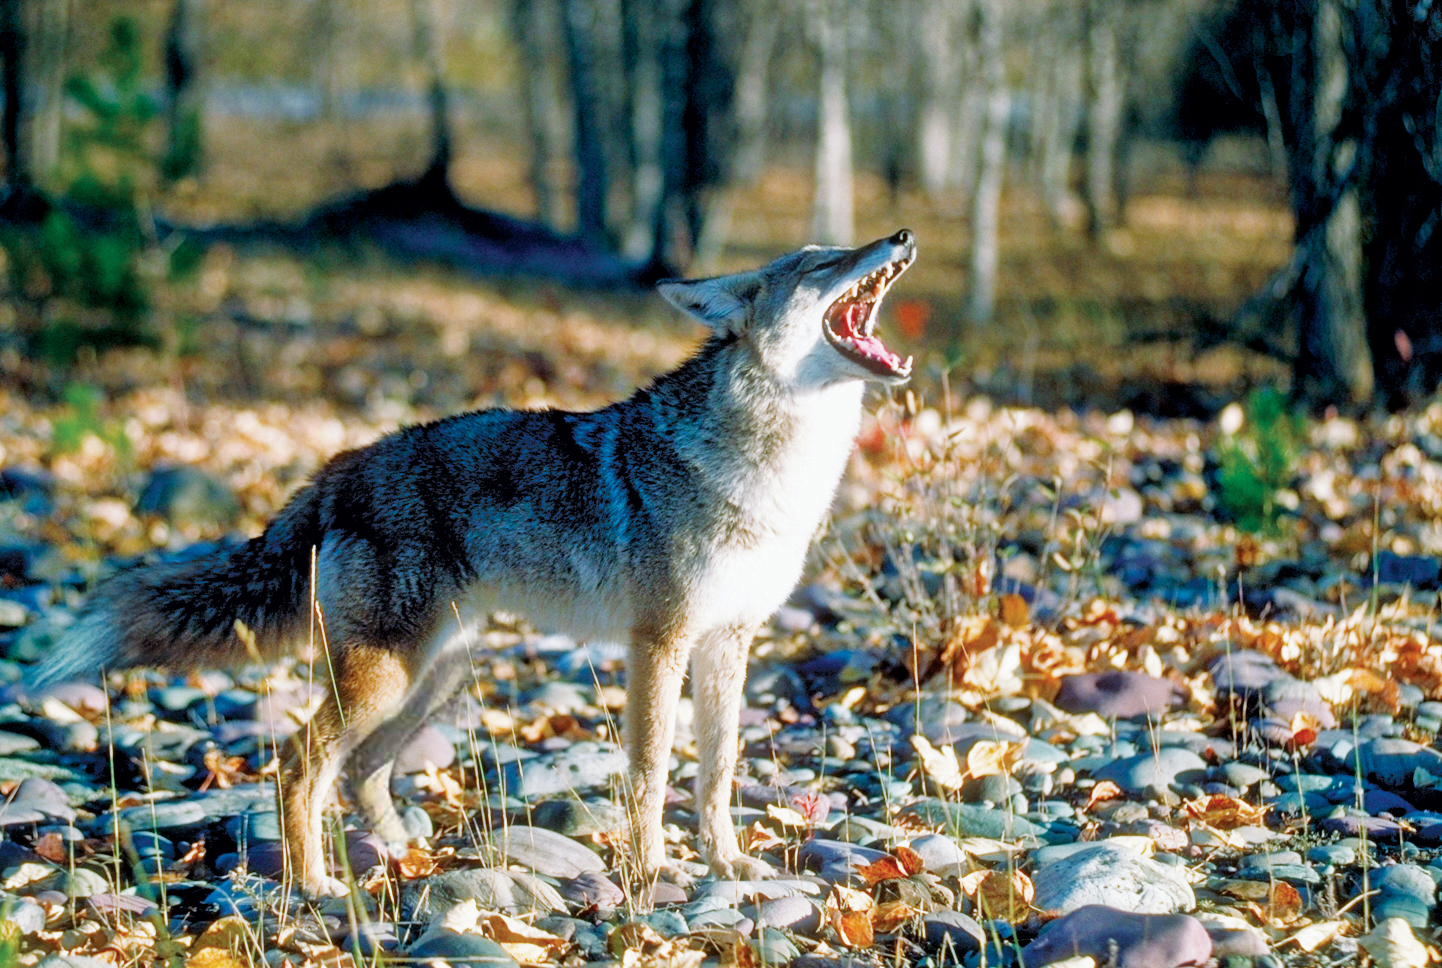 A coyote howling in the woods